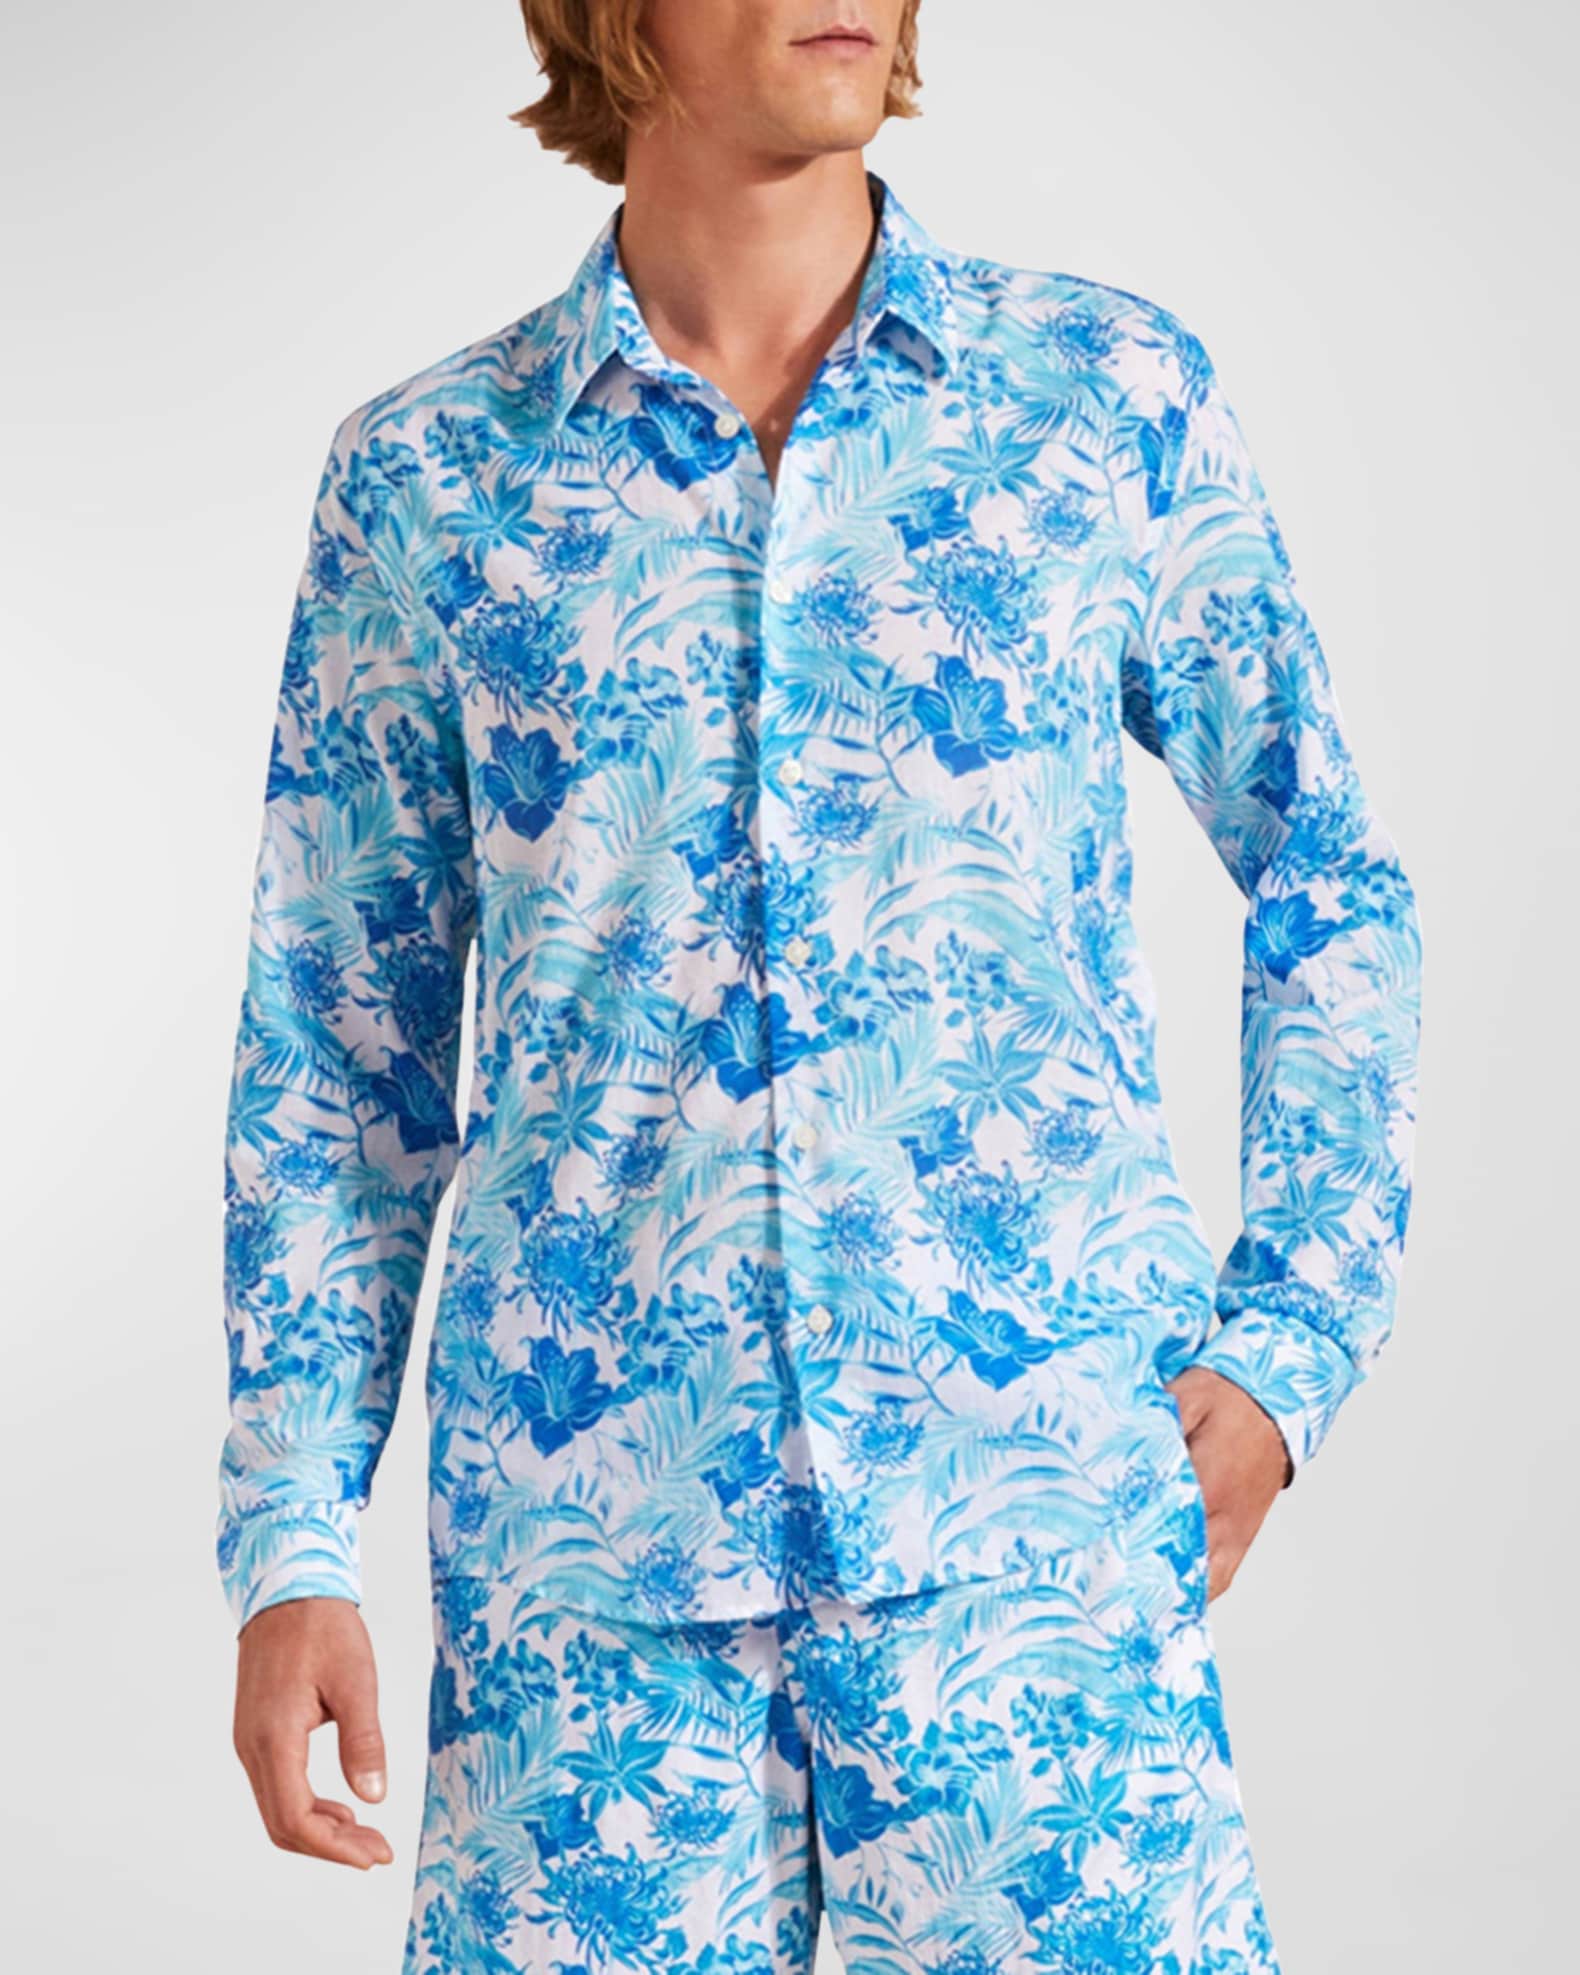 SHIRT IN ALLOVER PRINTED COTTON VOILE